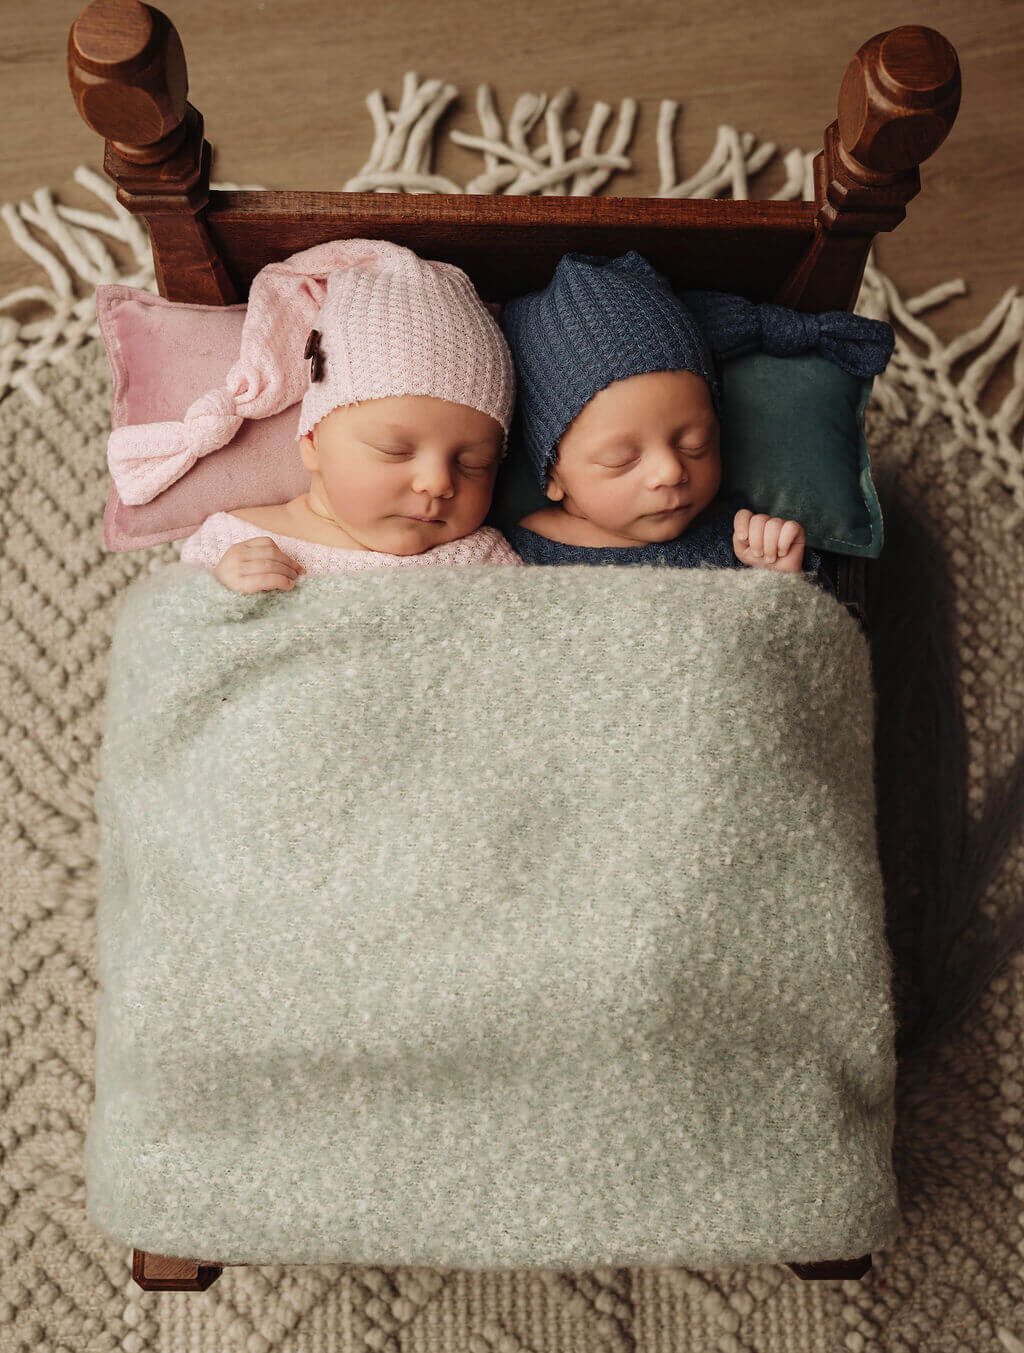 Newborn twins dressed in matching outfits sleeping in a studio bed prop at their newborn photo shoot in the Toronto area.